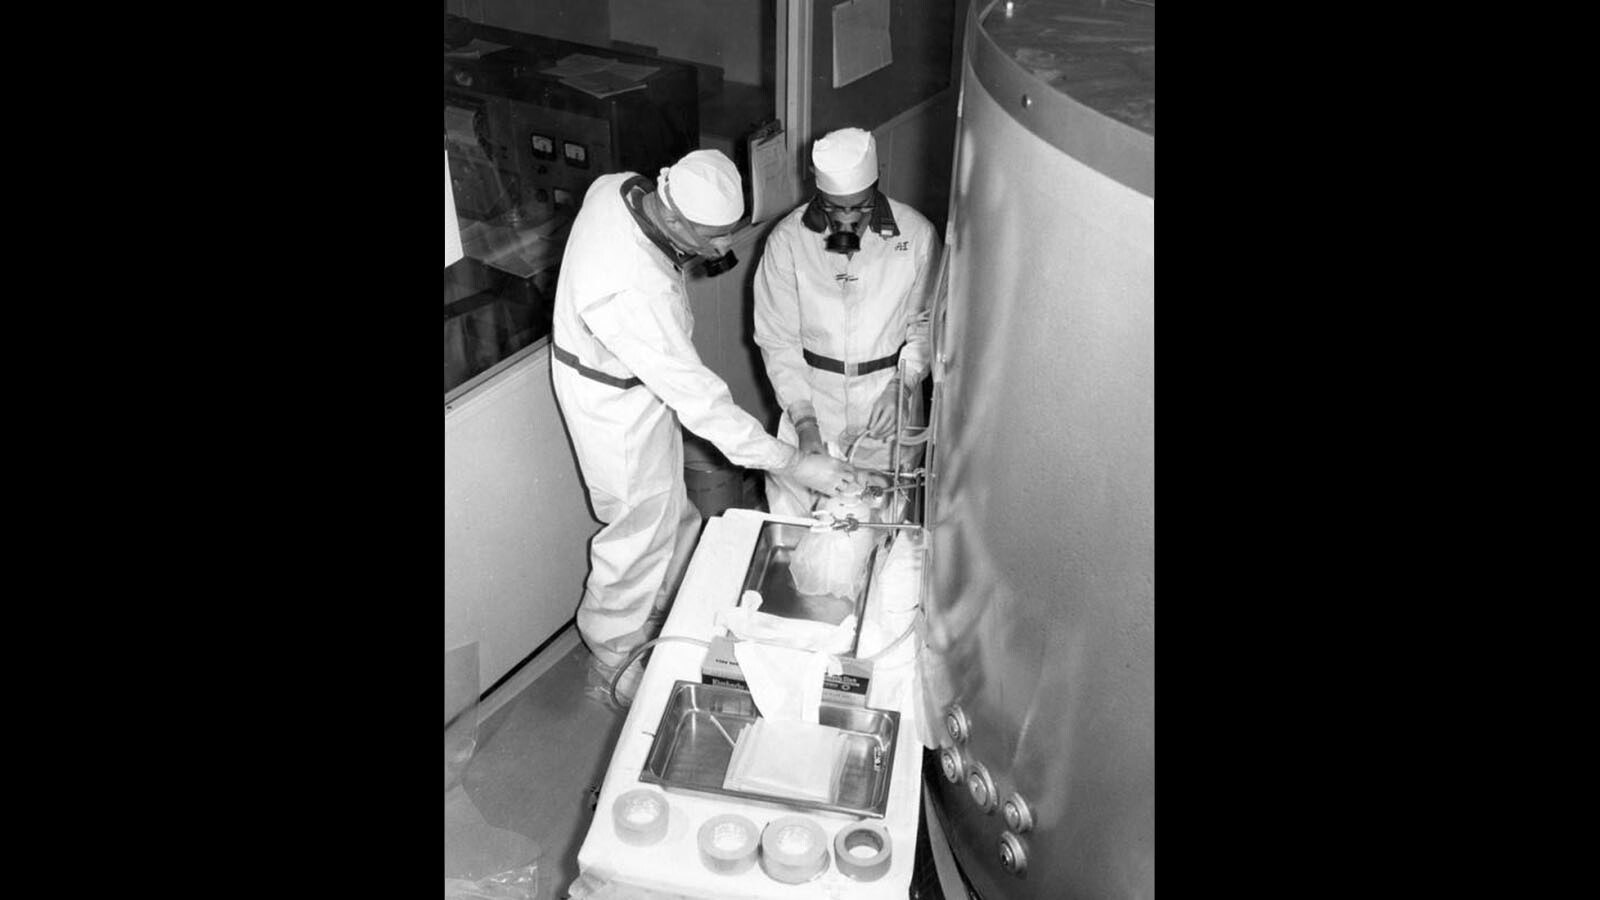 A pair of unidentified students wear respirators as they work next to the containment vessel of the small nuclear reactor that was on the University of Wyoming campus 50 years ago.